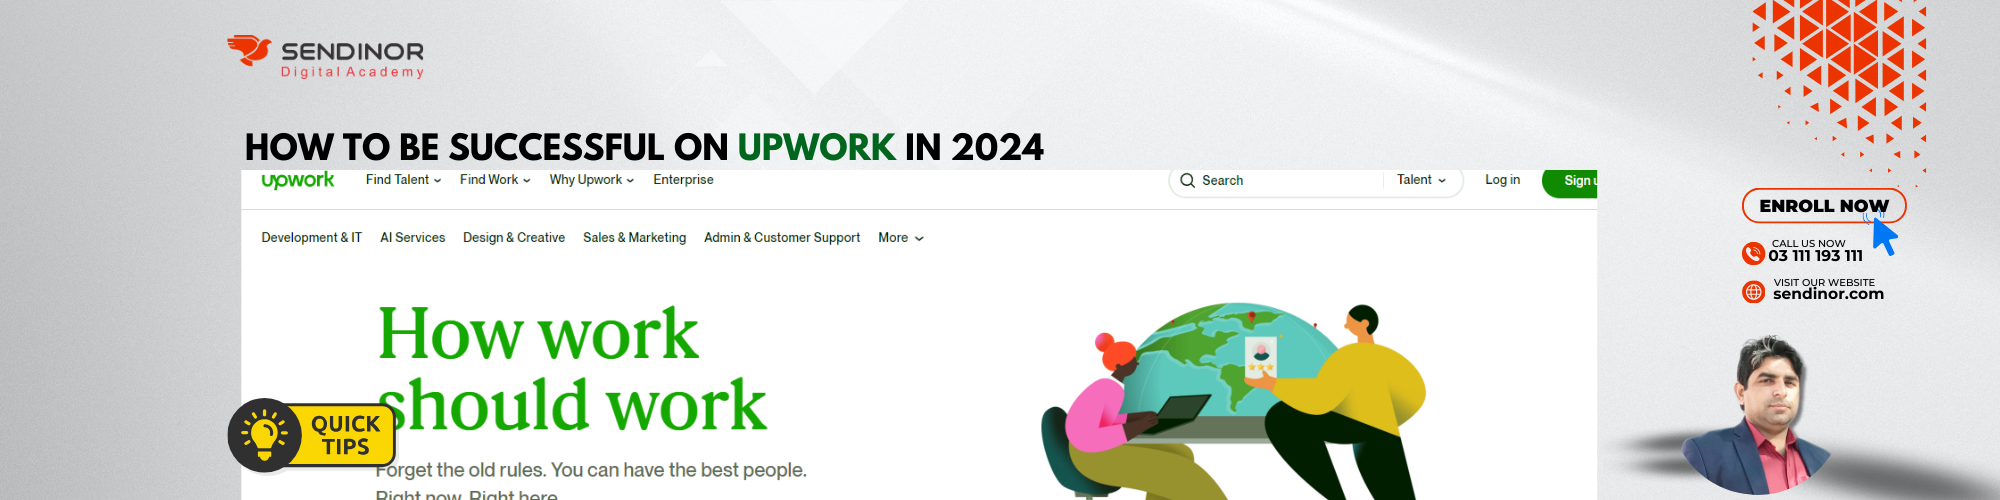 How to be Successful on Upwork in 2024